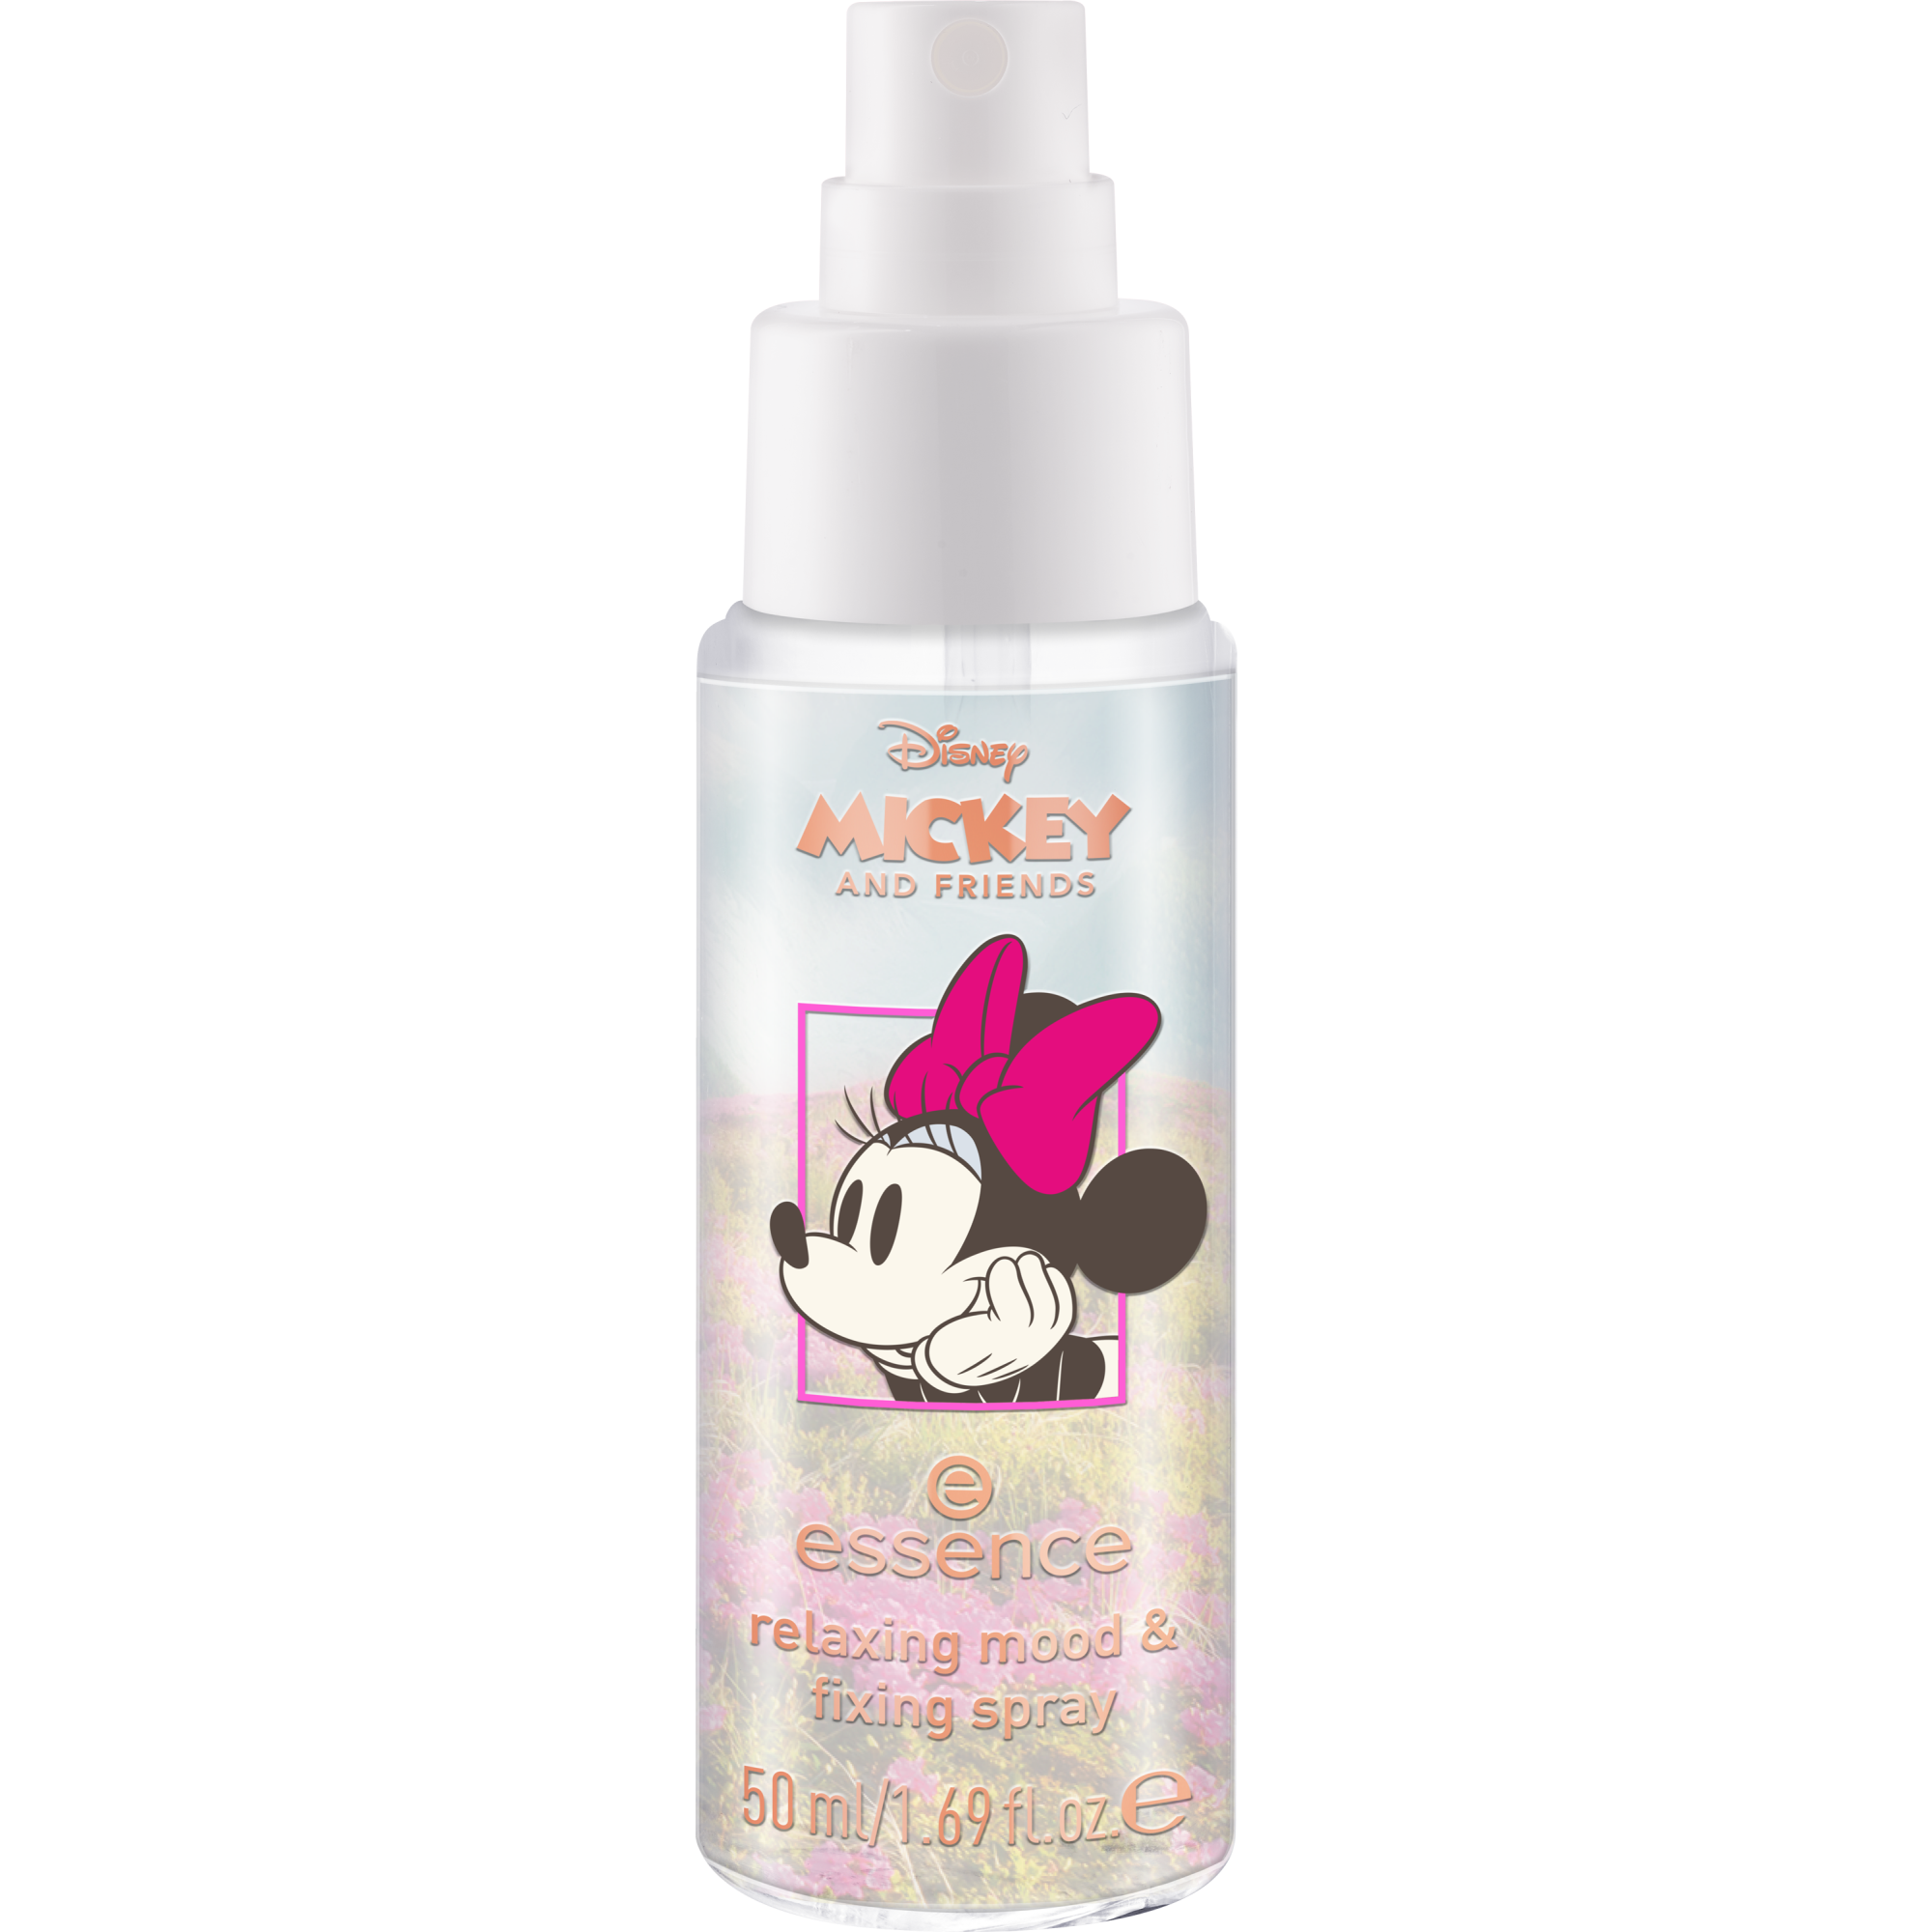 Disney Mickey and Friends relaxing mood & fixing spray